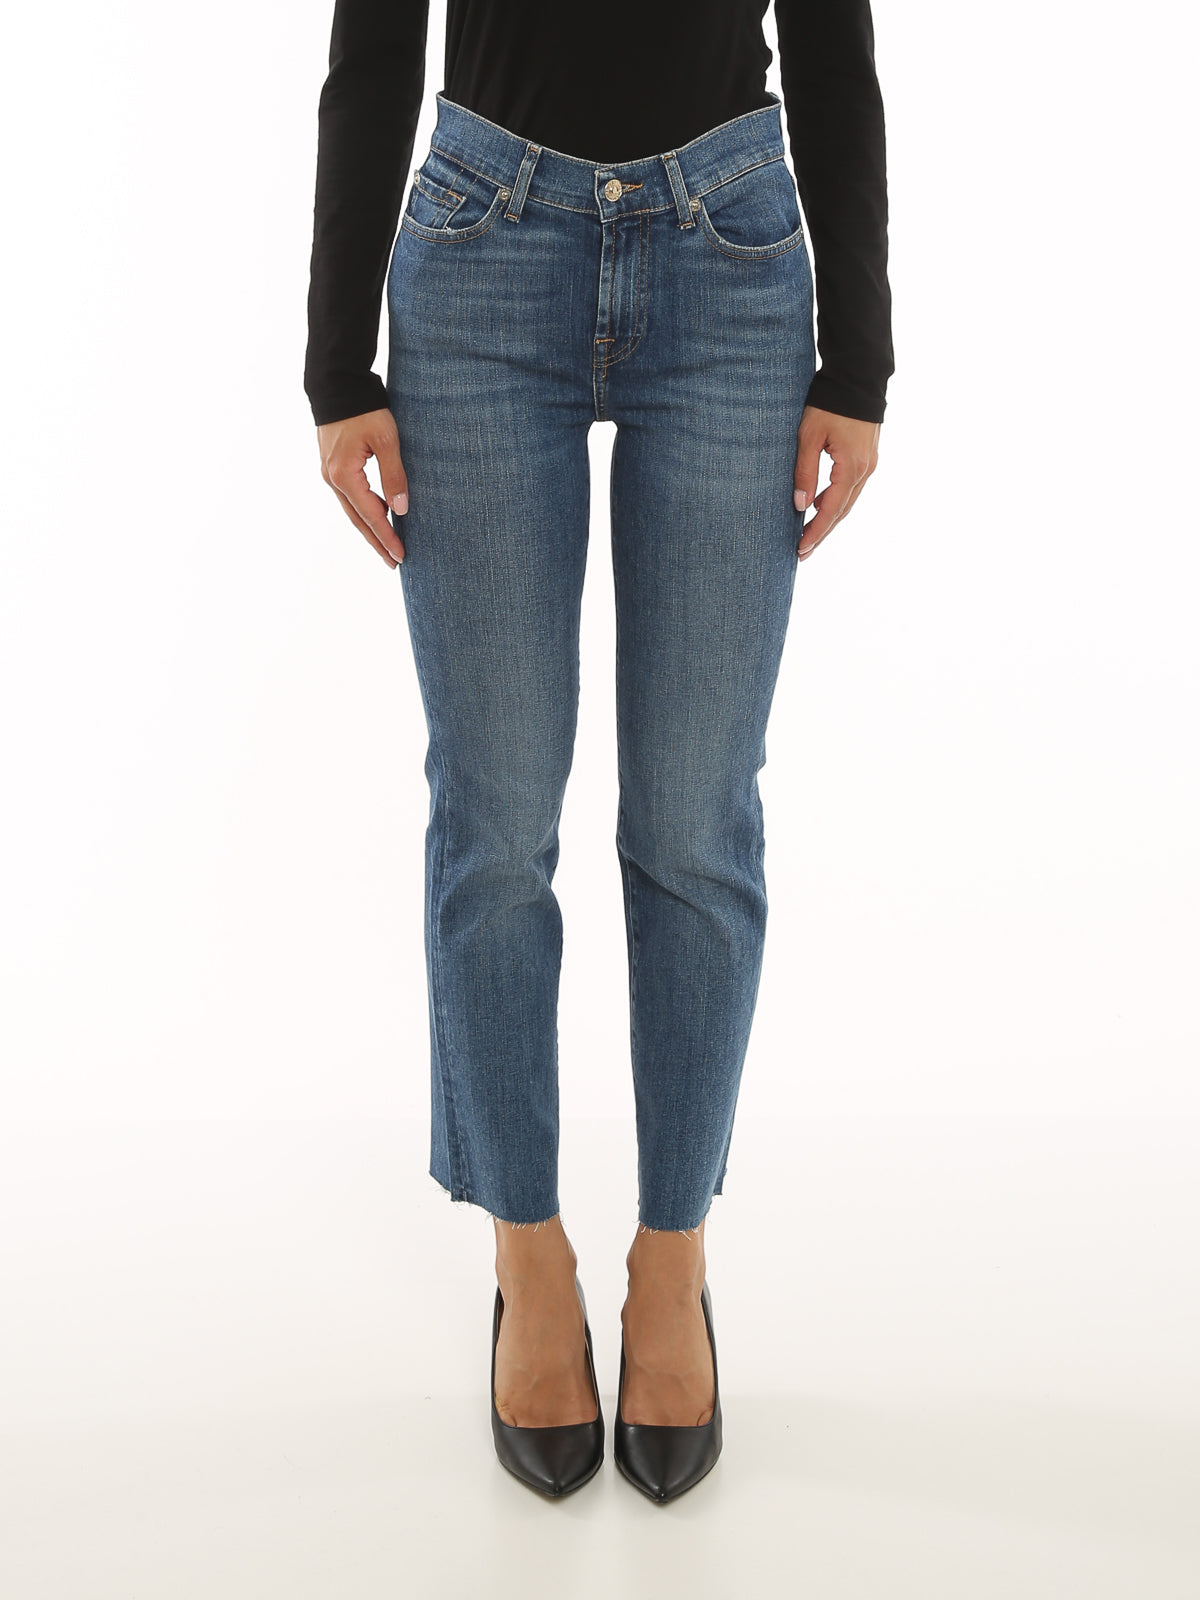 7 FOR ALL MANKIND 7 FOR ALL MANKIND LOGO PATCH CROPPED JEANS